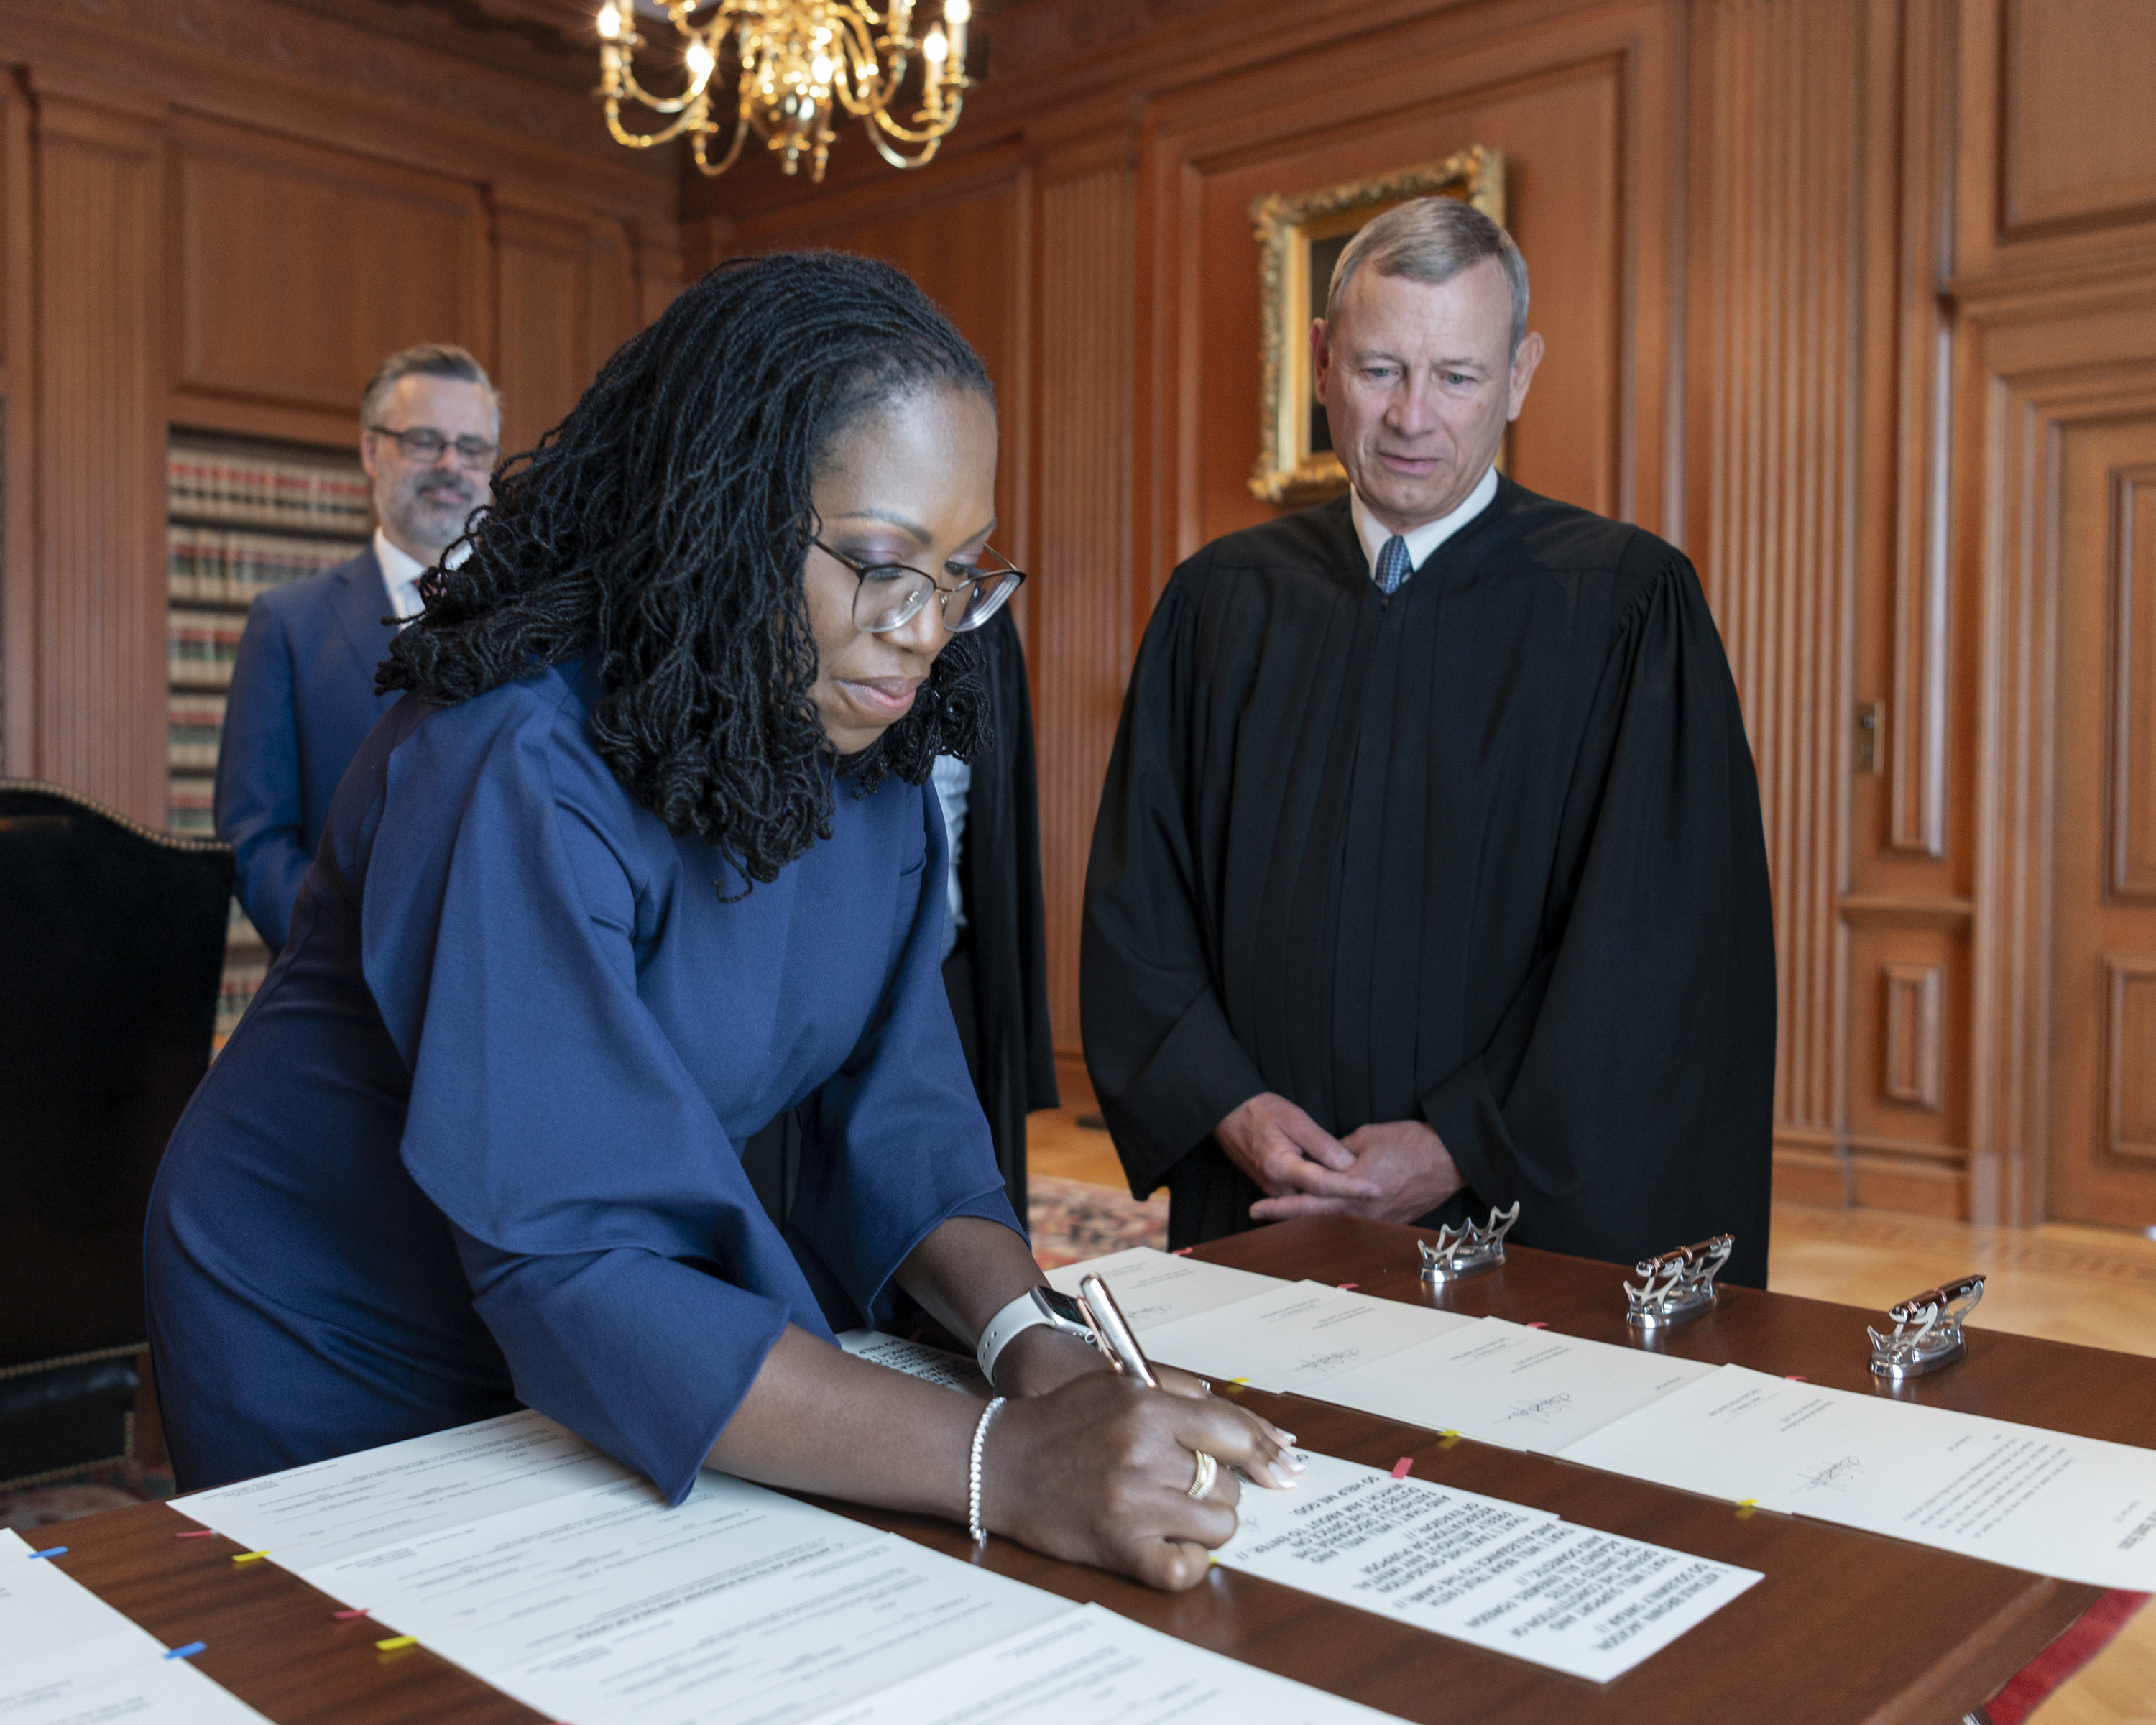 Chief Justice John G. Roberts Jr. looks on as Justice Ketanji Brown Jackson signs the Oaths of Office in the Justices' Conference Room at the Supreme Court on June 30 in Washington, DC.